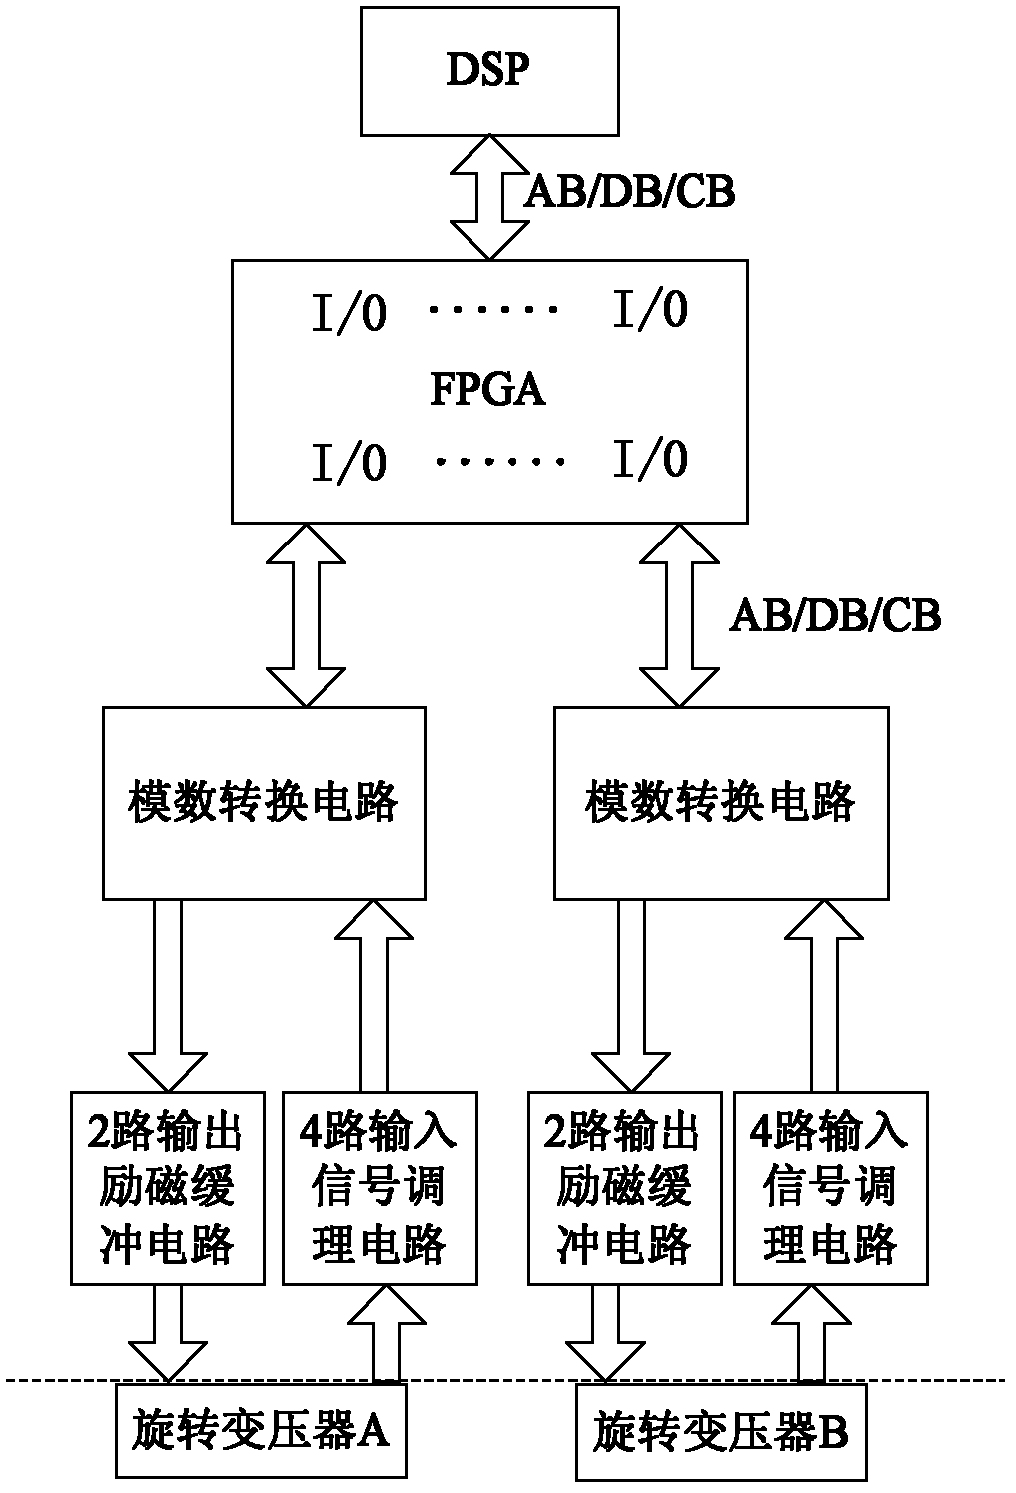 Decoding device and method for rotary transformer based on single FPGA (Field Programmable Gate Array)